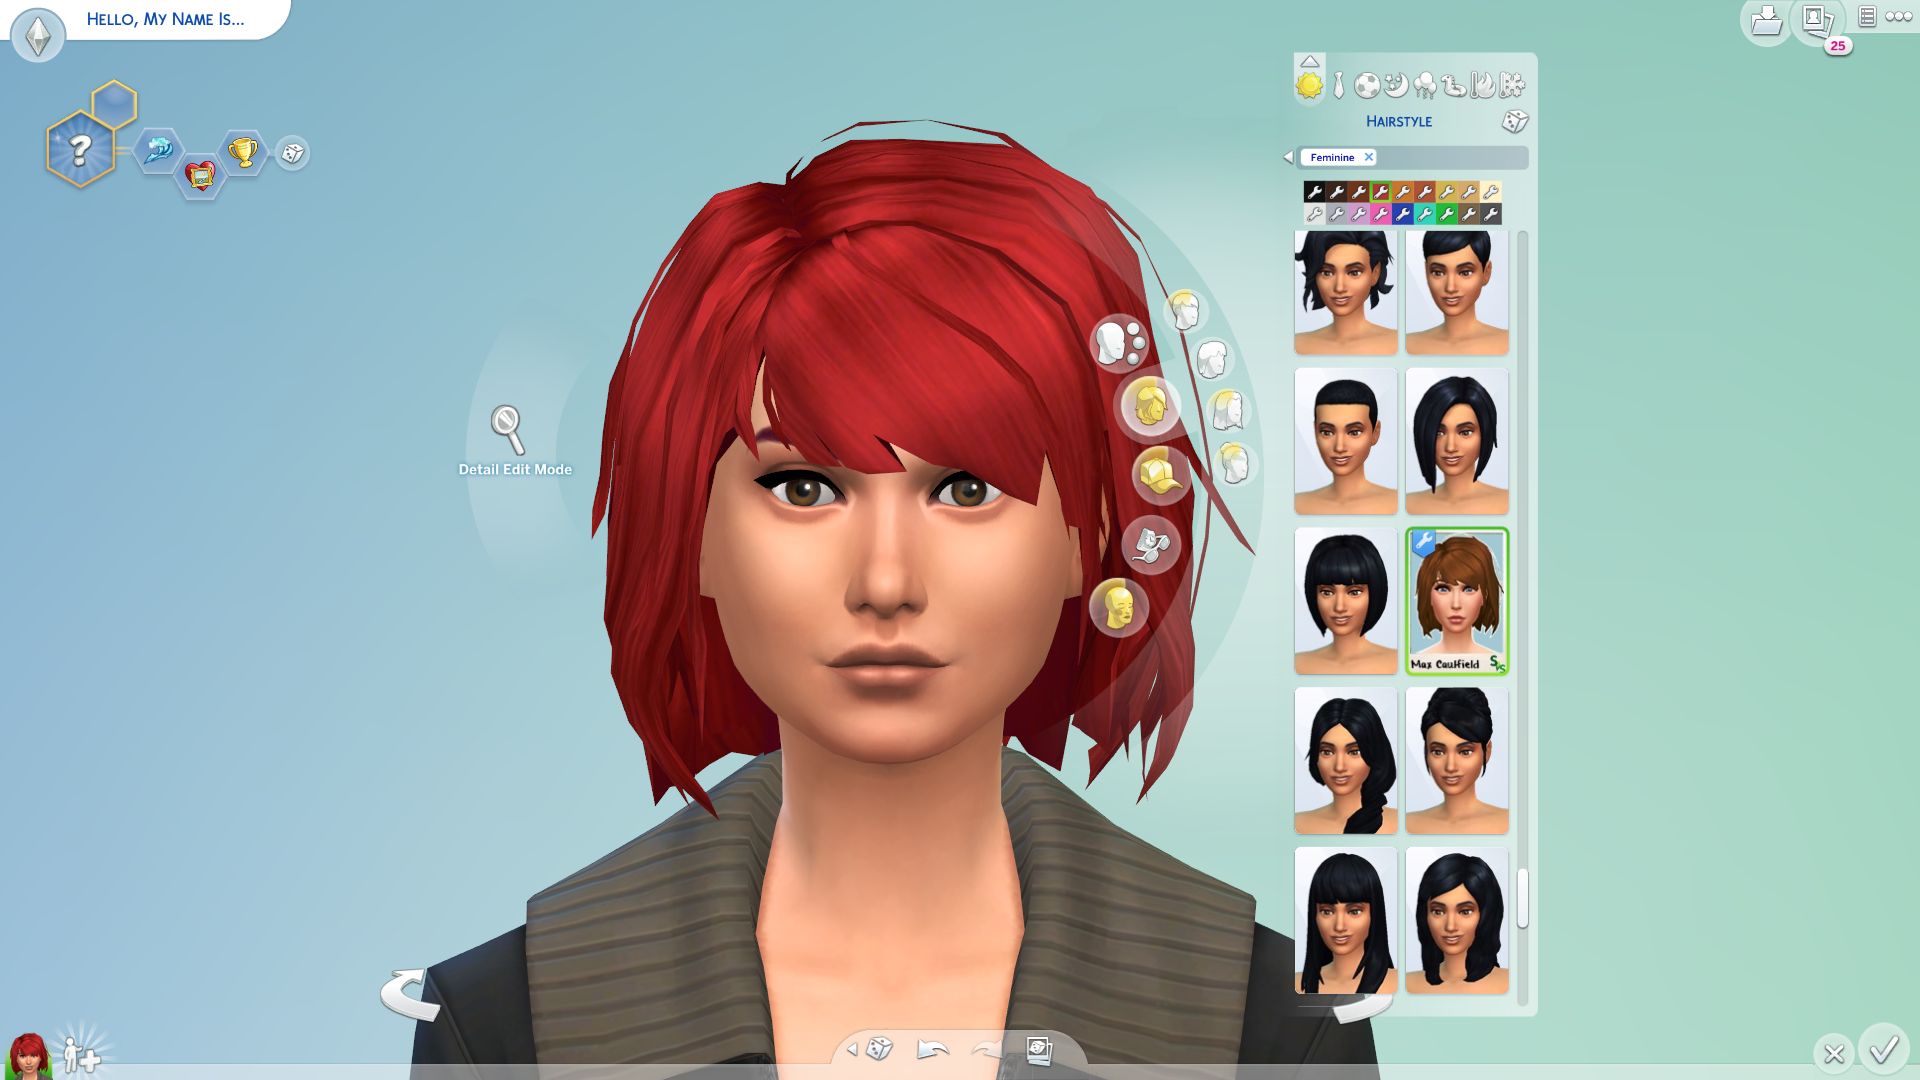 Sims 4: 10 Best Taylor Swift Sims & CC To Download Right Now